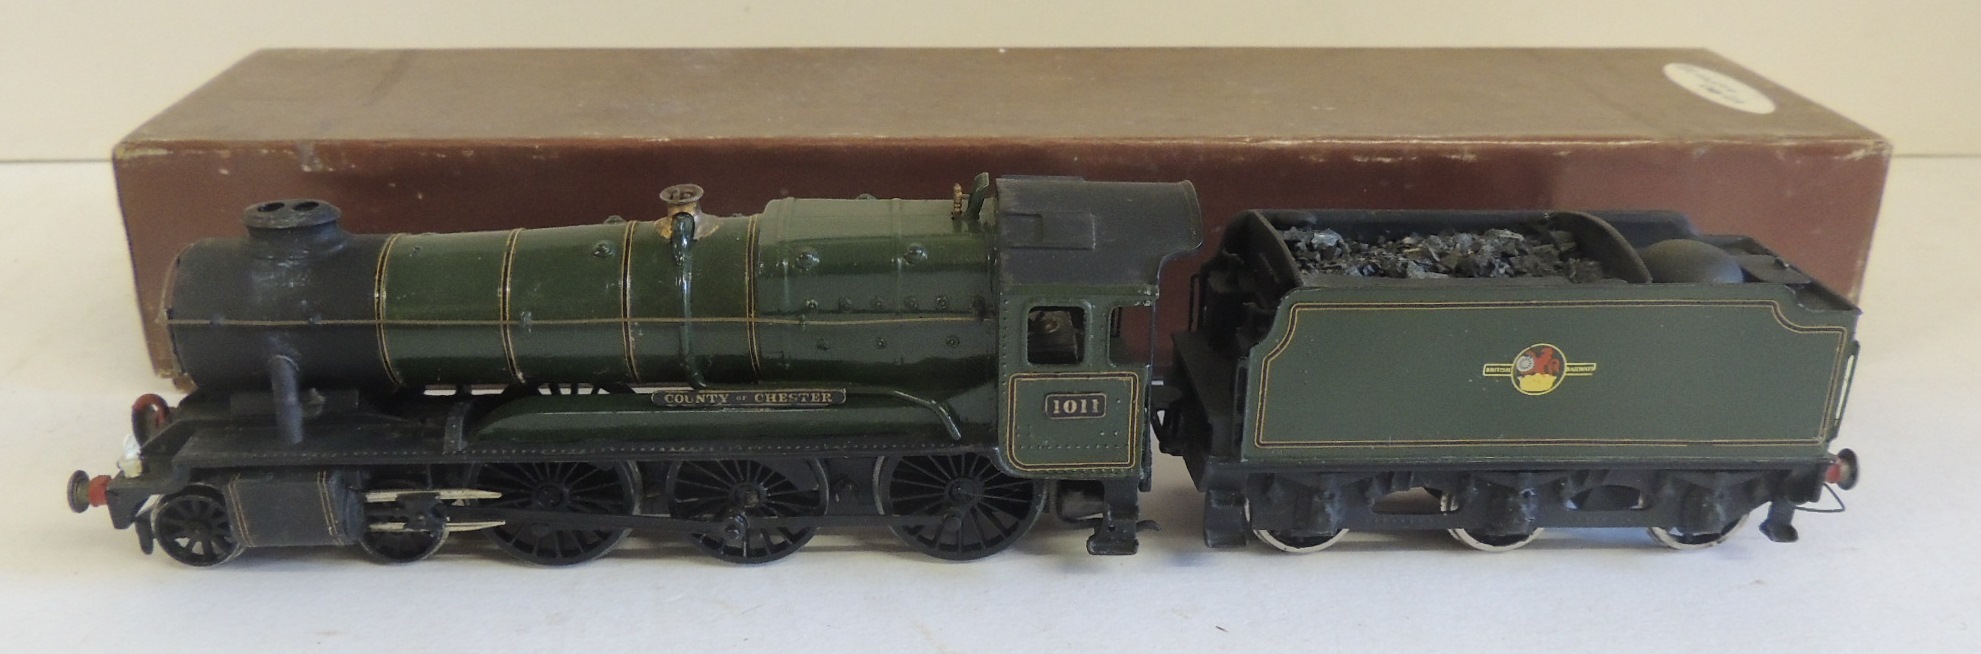 A constructed model of 4-6-0 County of Chester with tender no.1011, BR green, in box